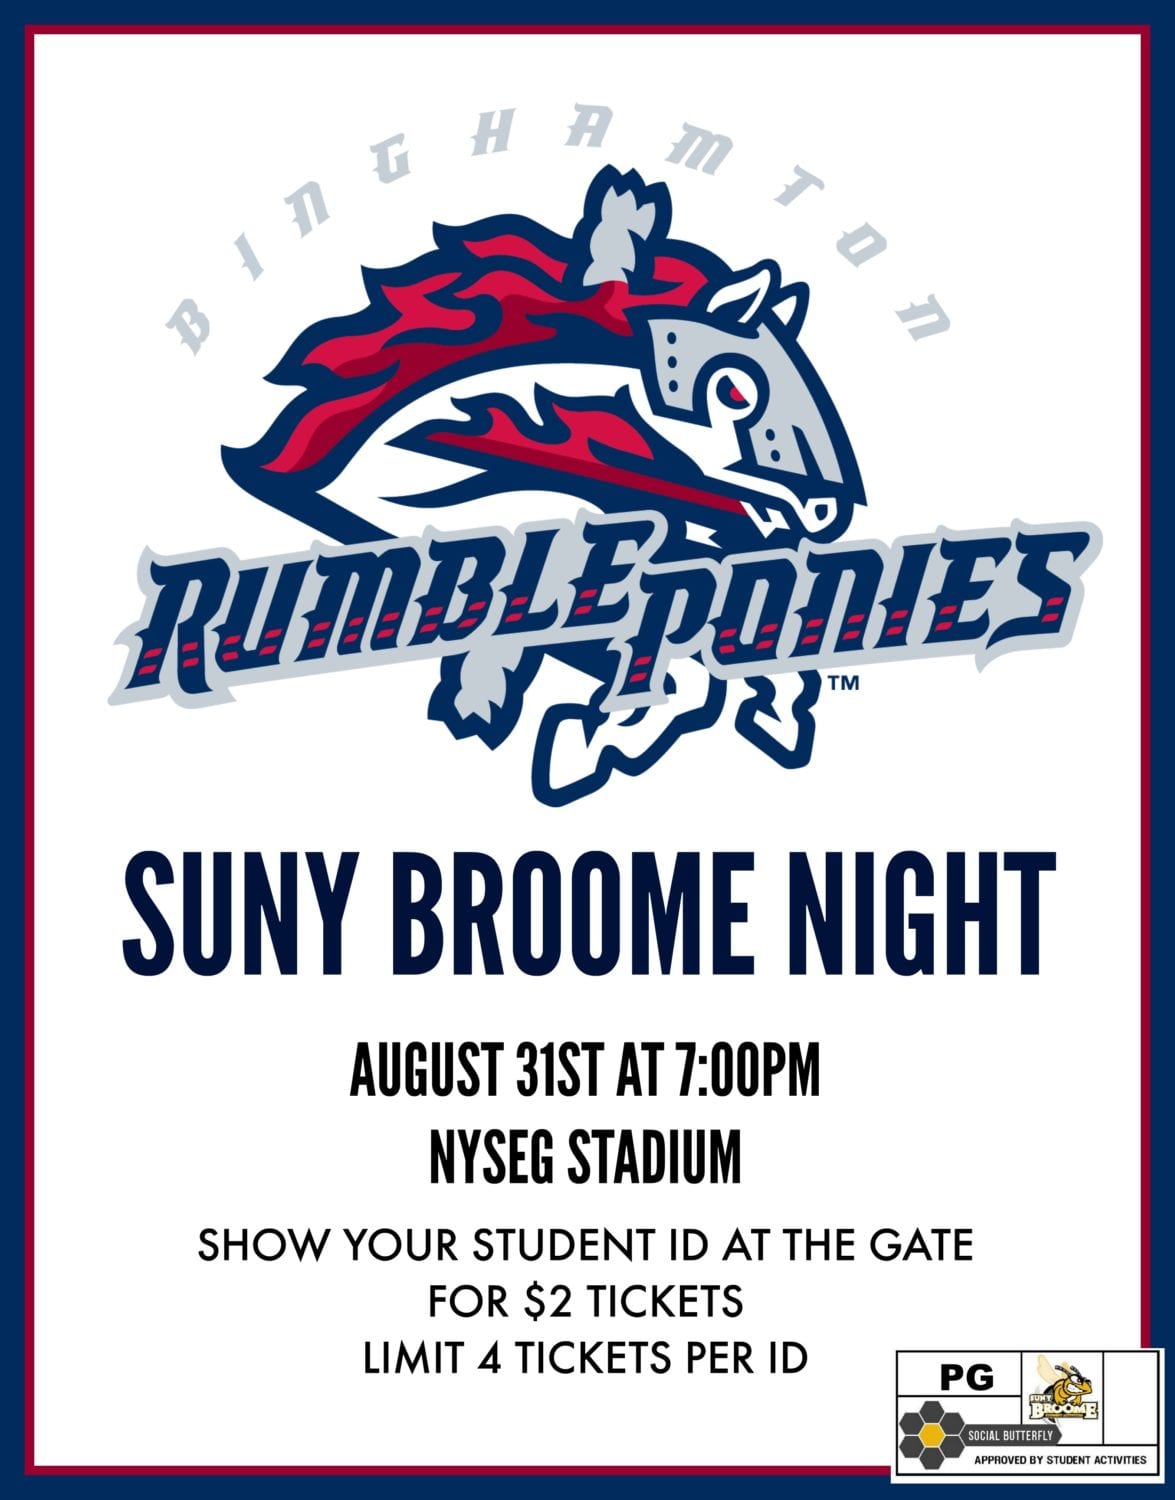 SUNY Broome Night with the Rumble Ponies on Aug. 31